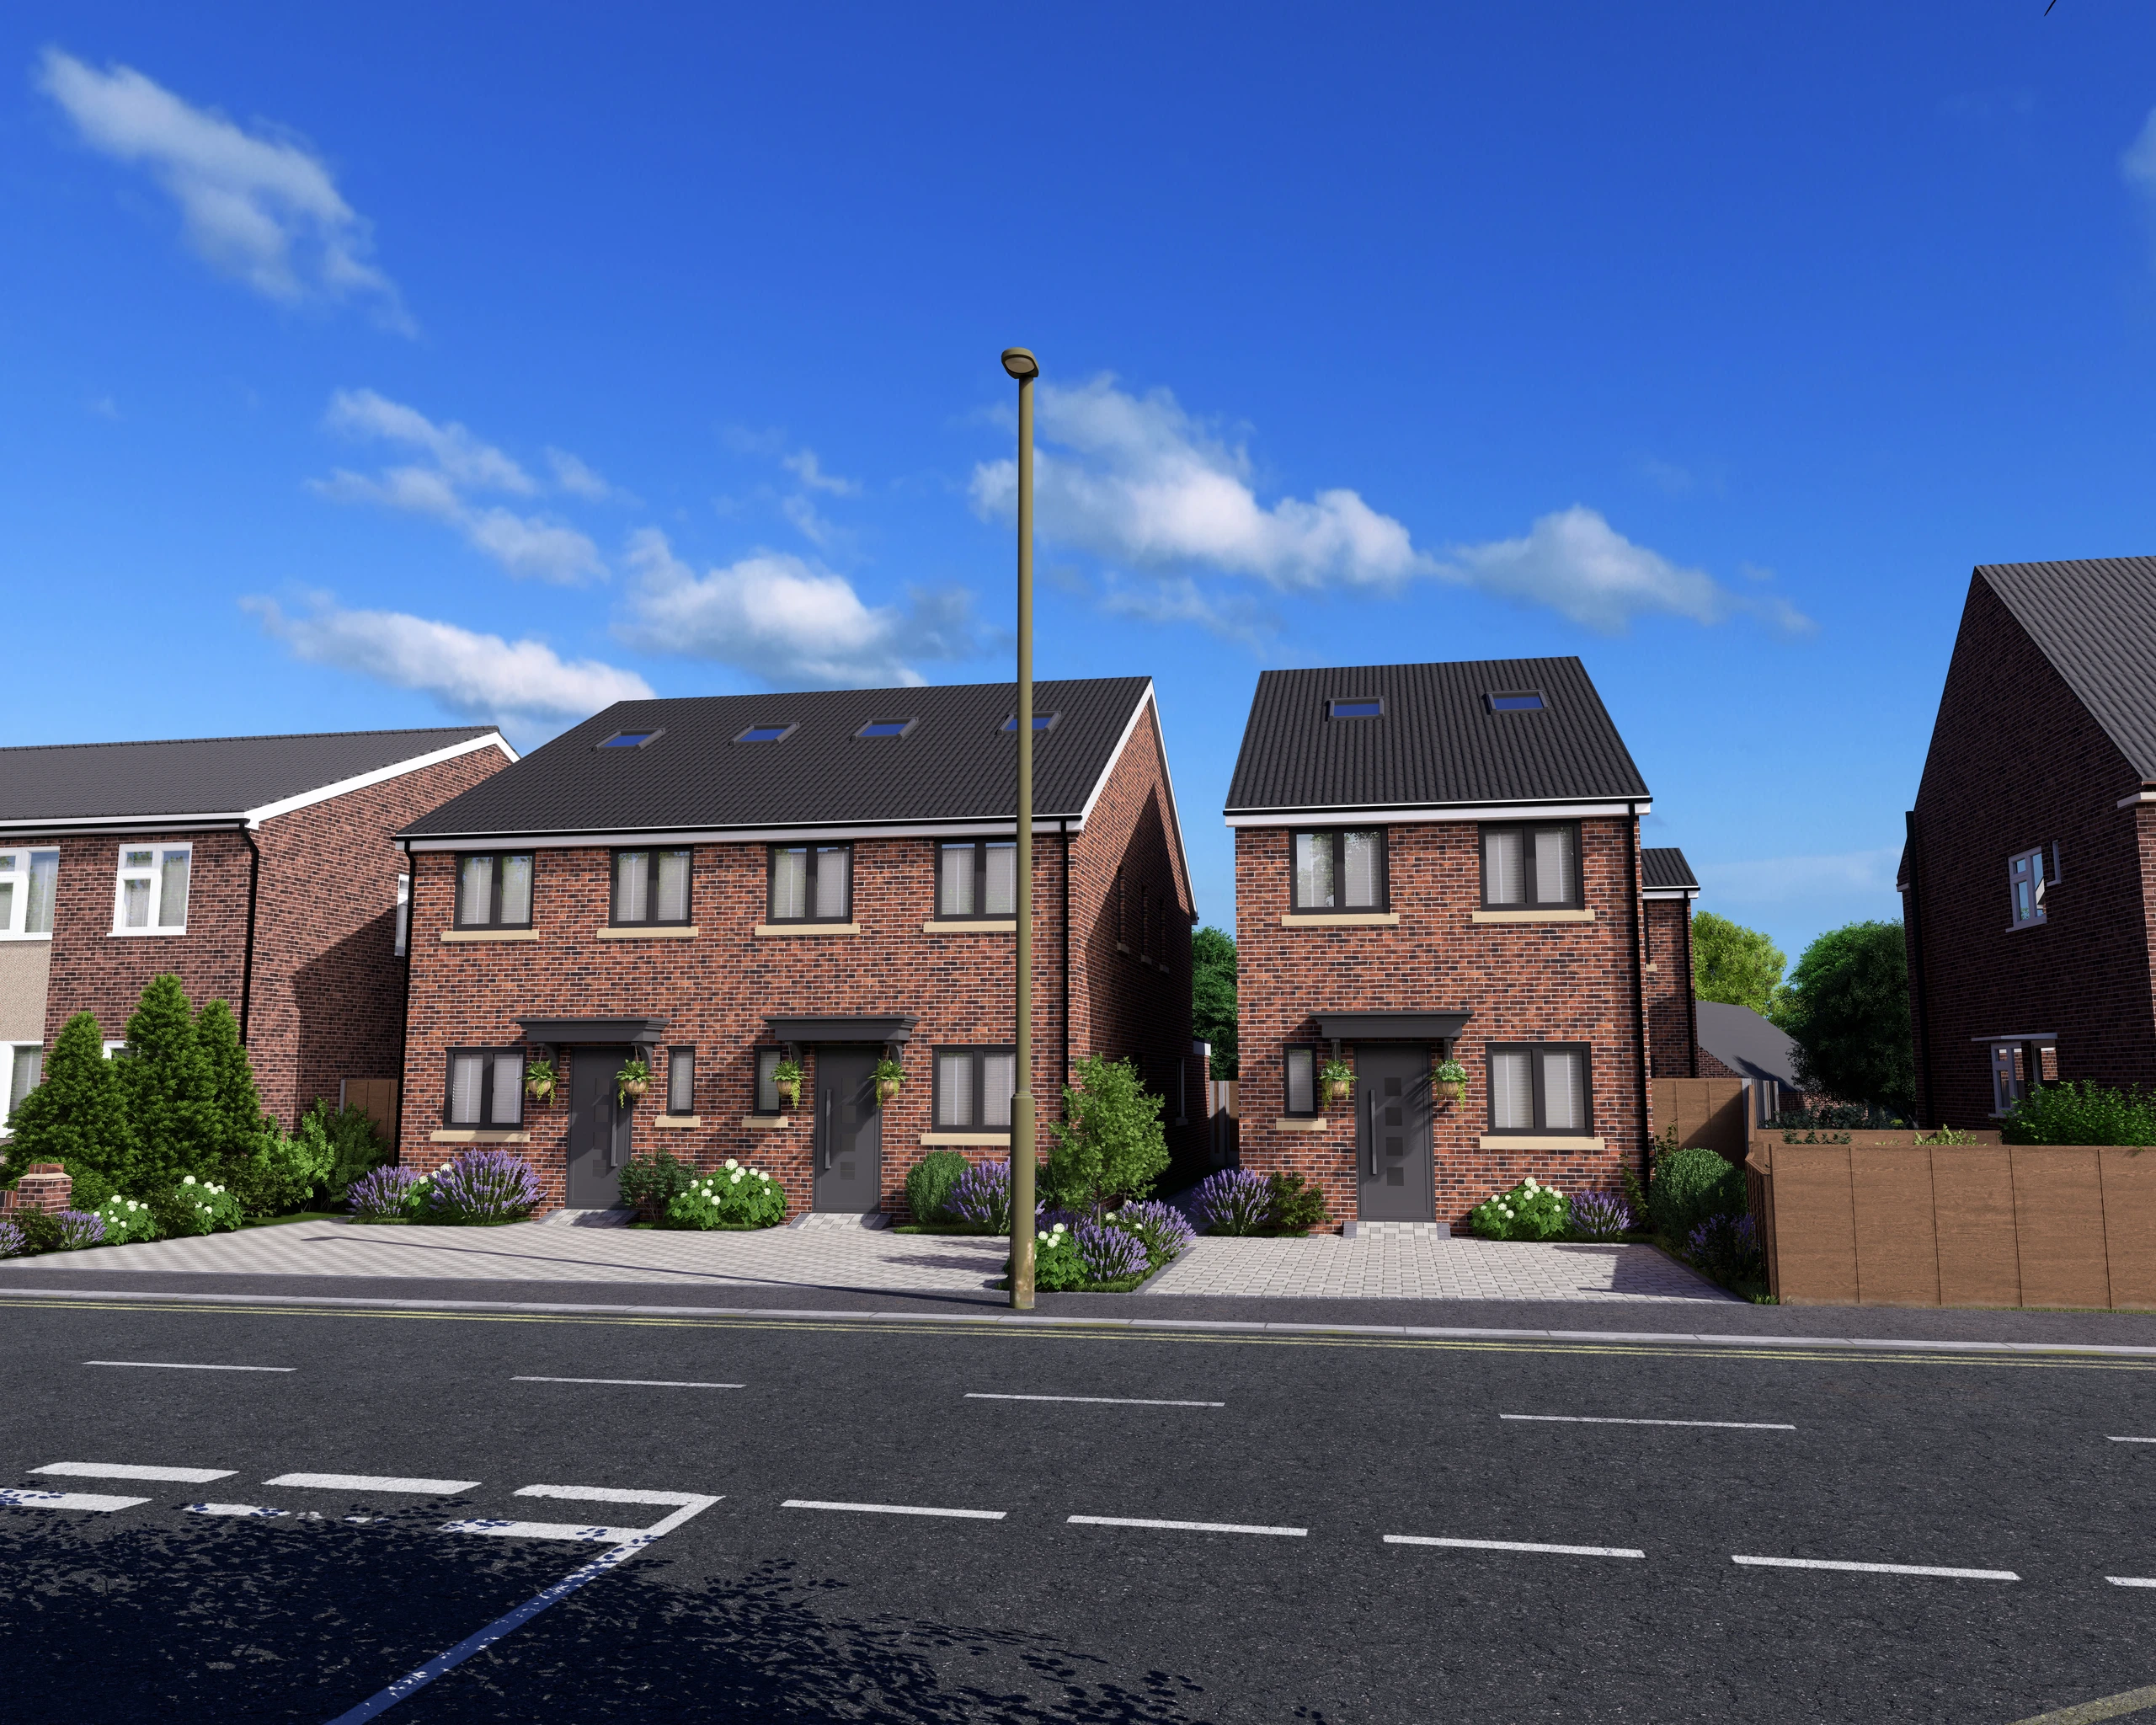 CGI Design of Proposed Home Development with Anthracite Doors